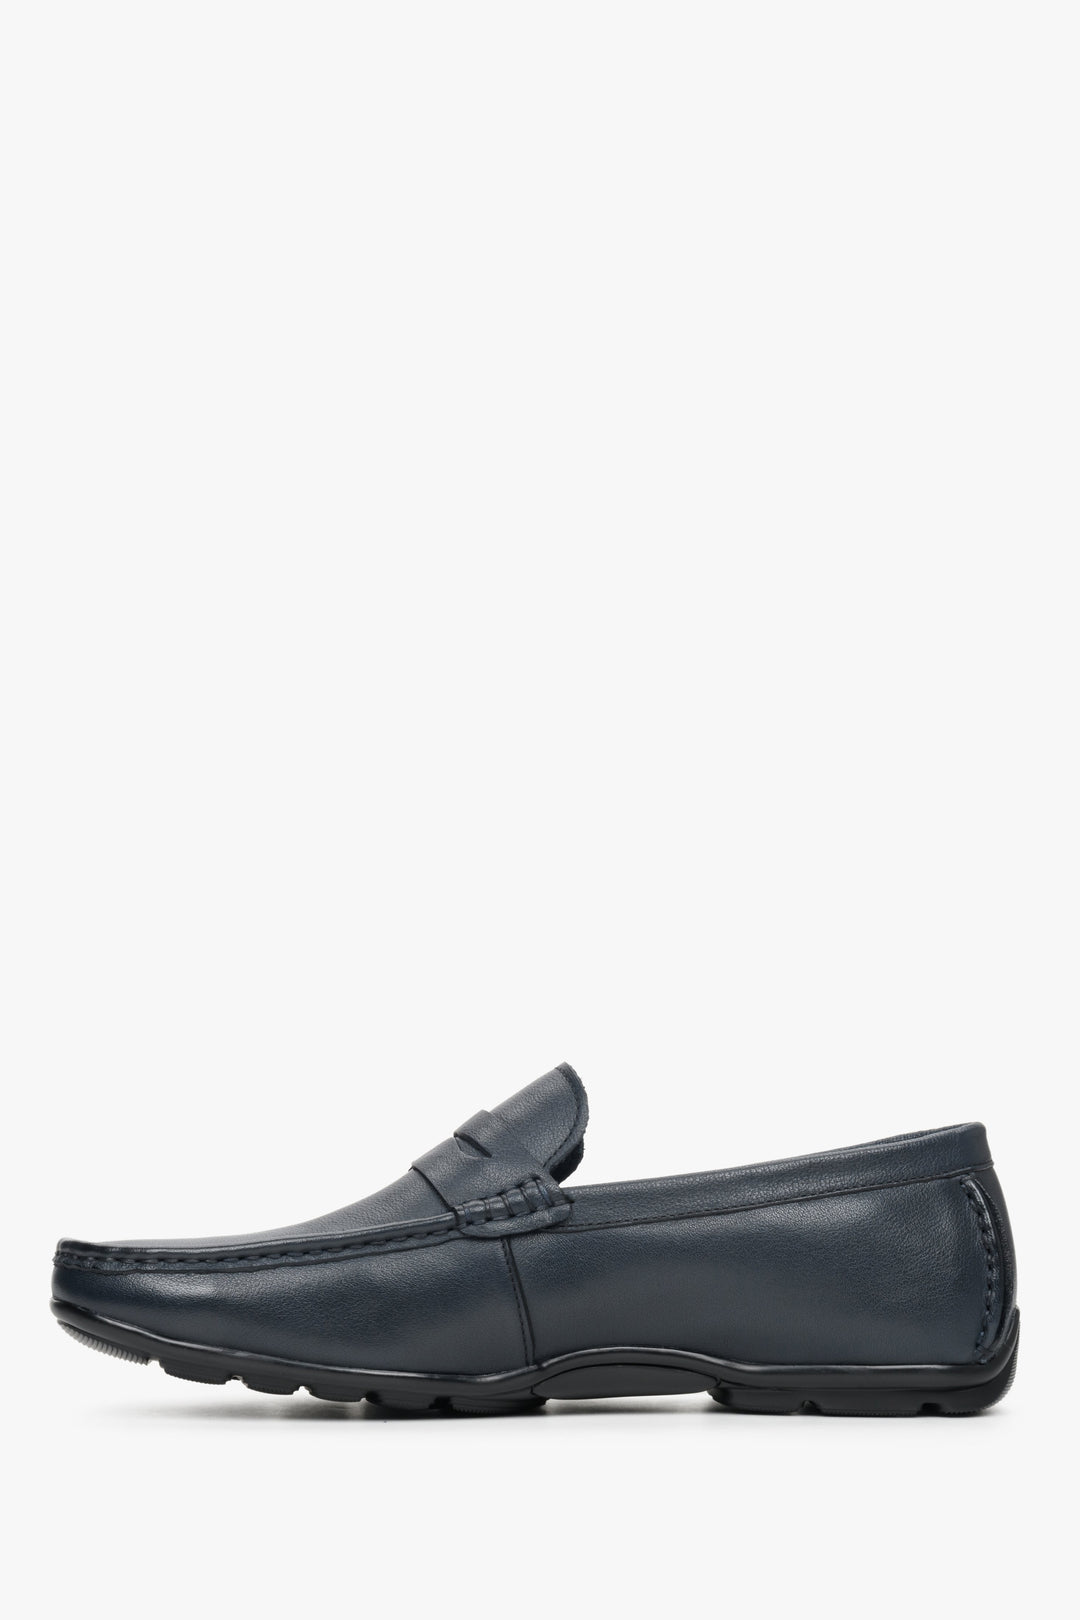 Men's navy blue leather loafers for spring and autumn - shoe profile presentation.